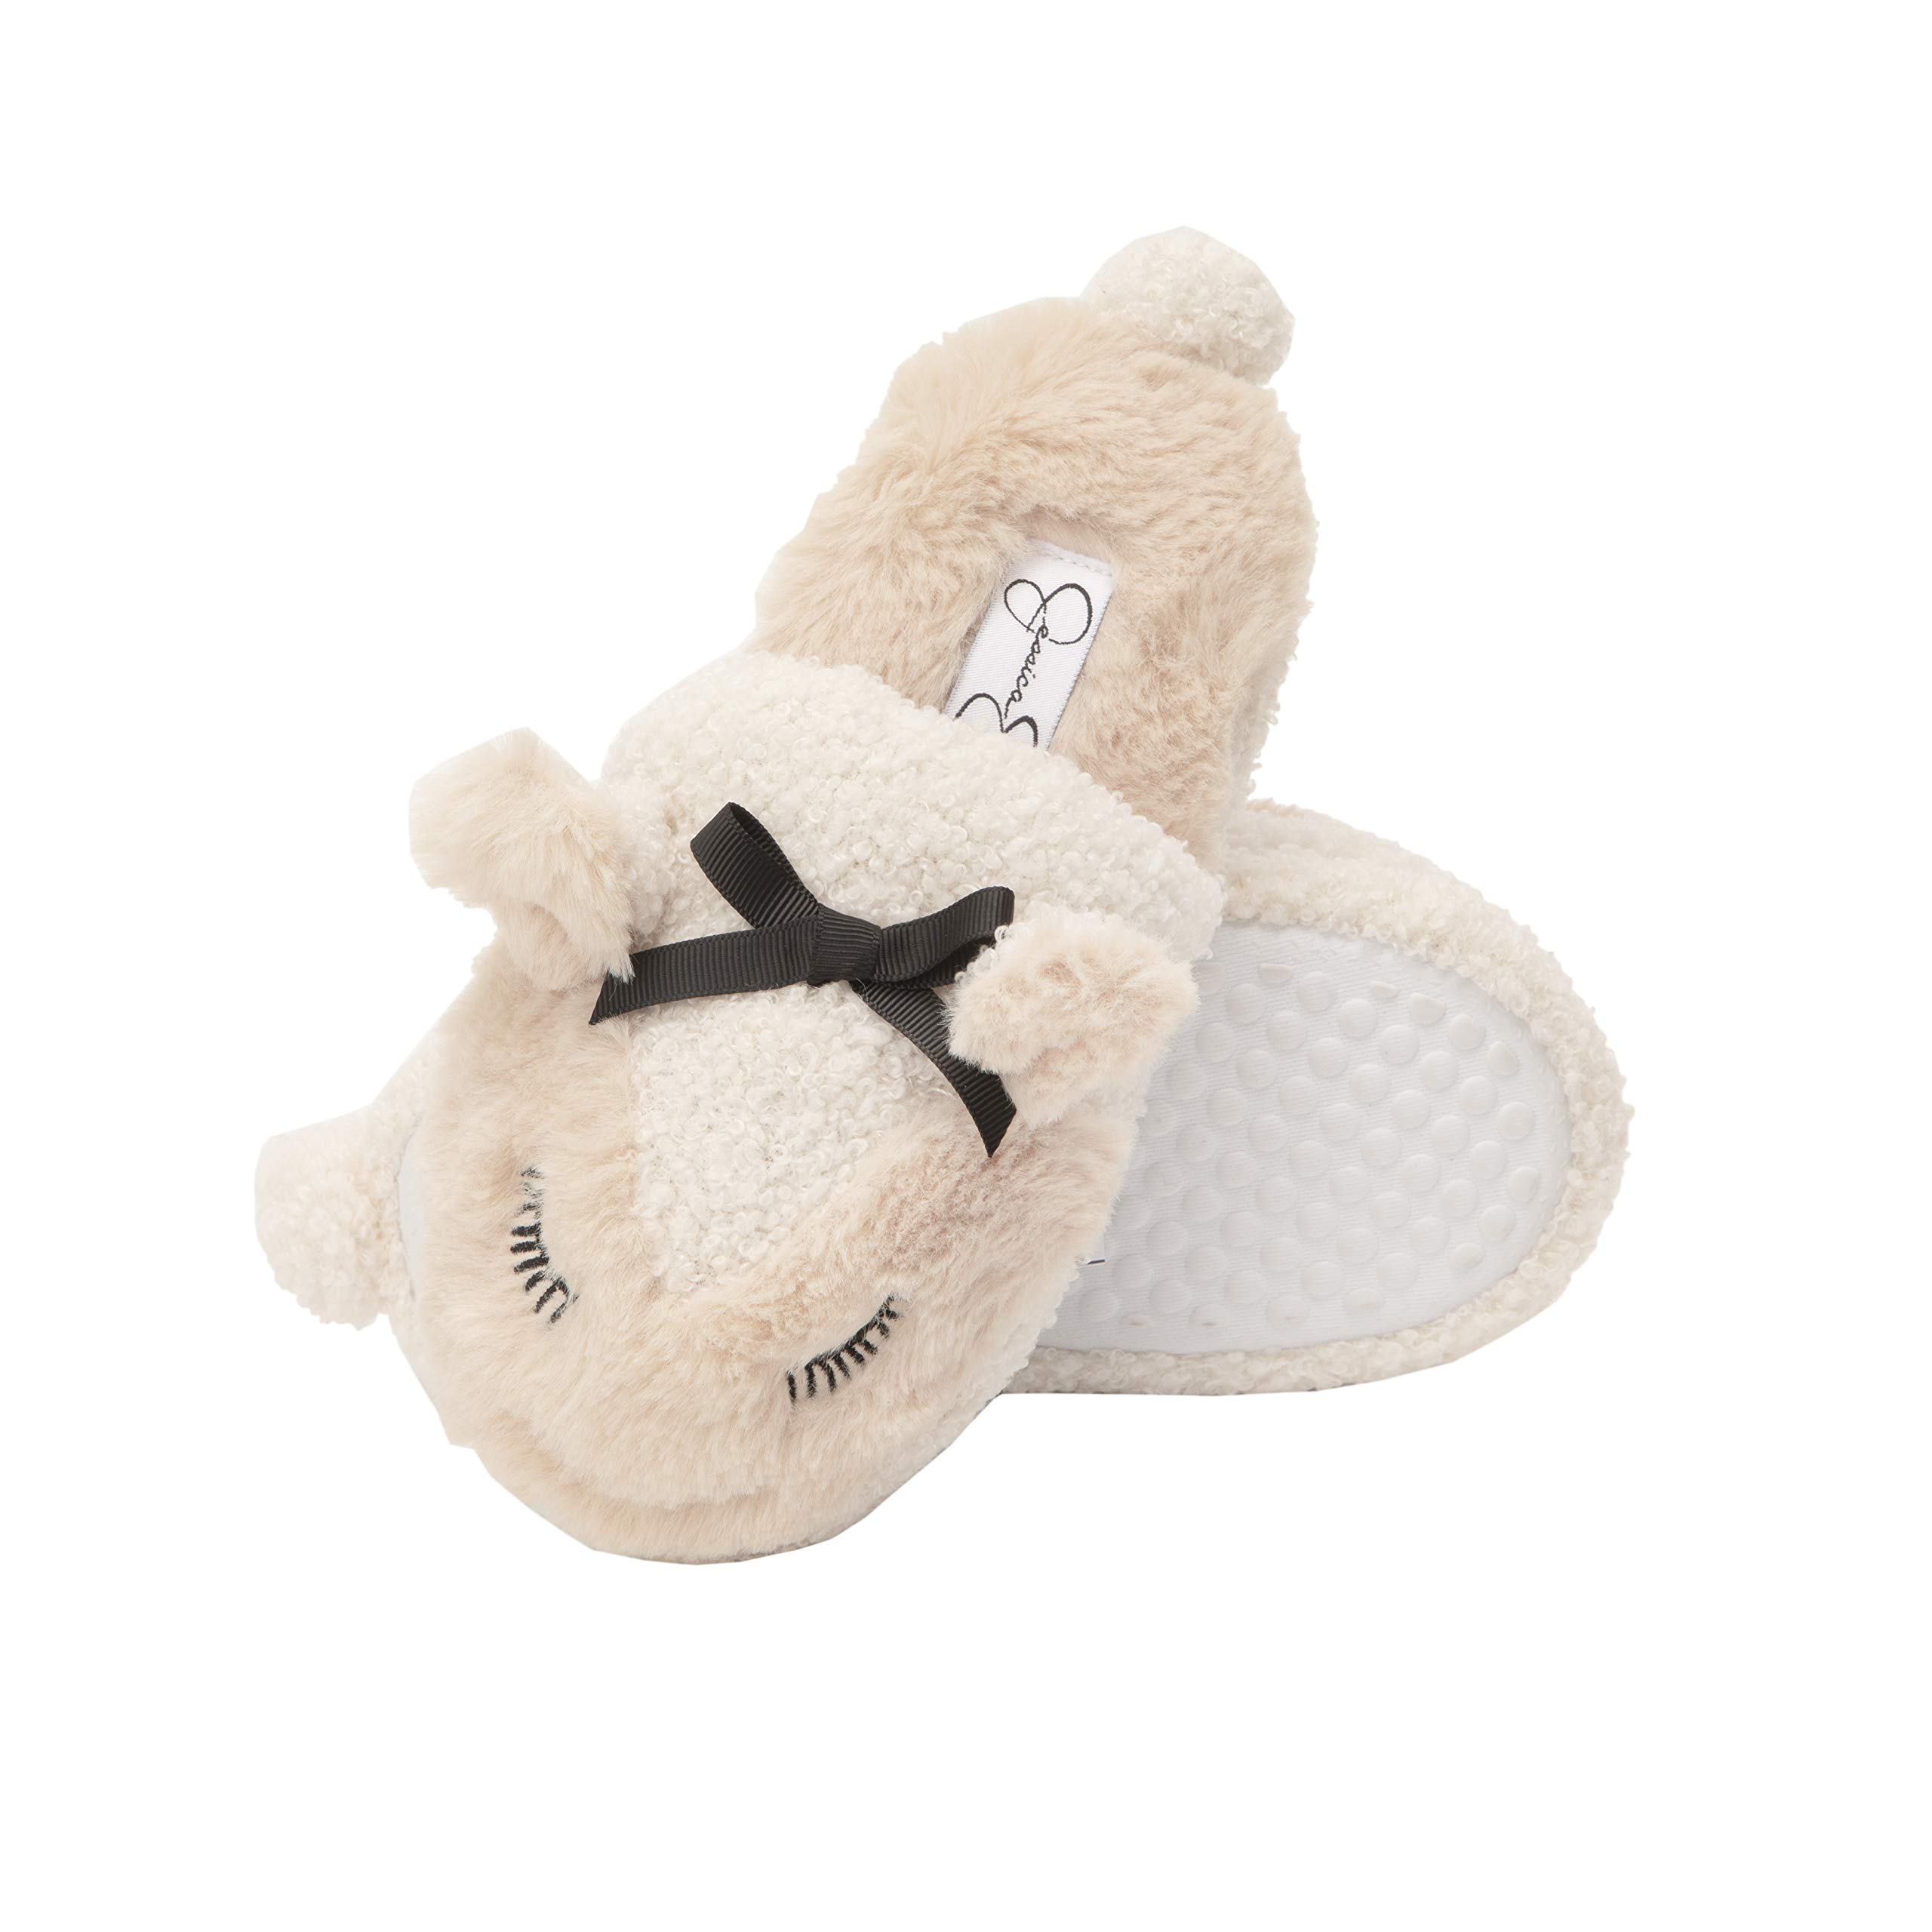 Jessica Simpson Girls Cute and Cozy Plush Slip On House Slippers with Memory Foam,Ivory,Large Little Kid